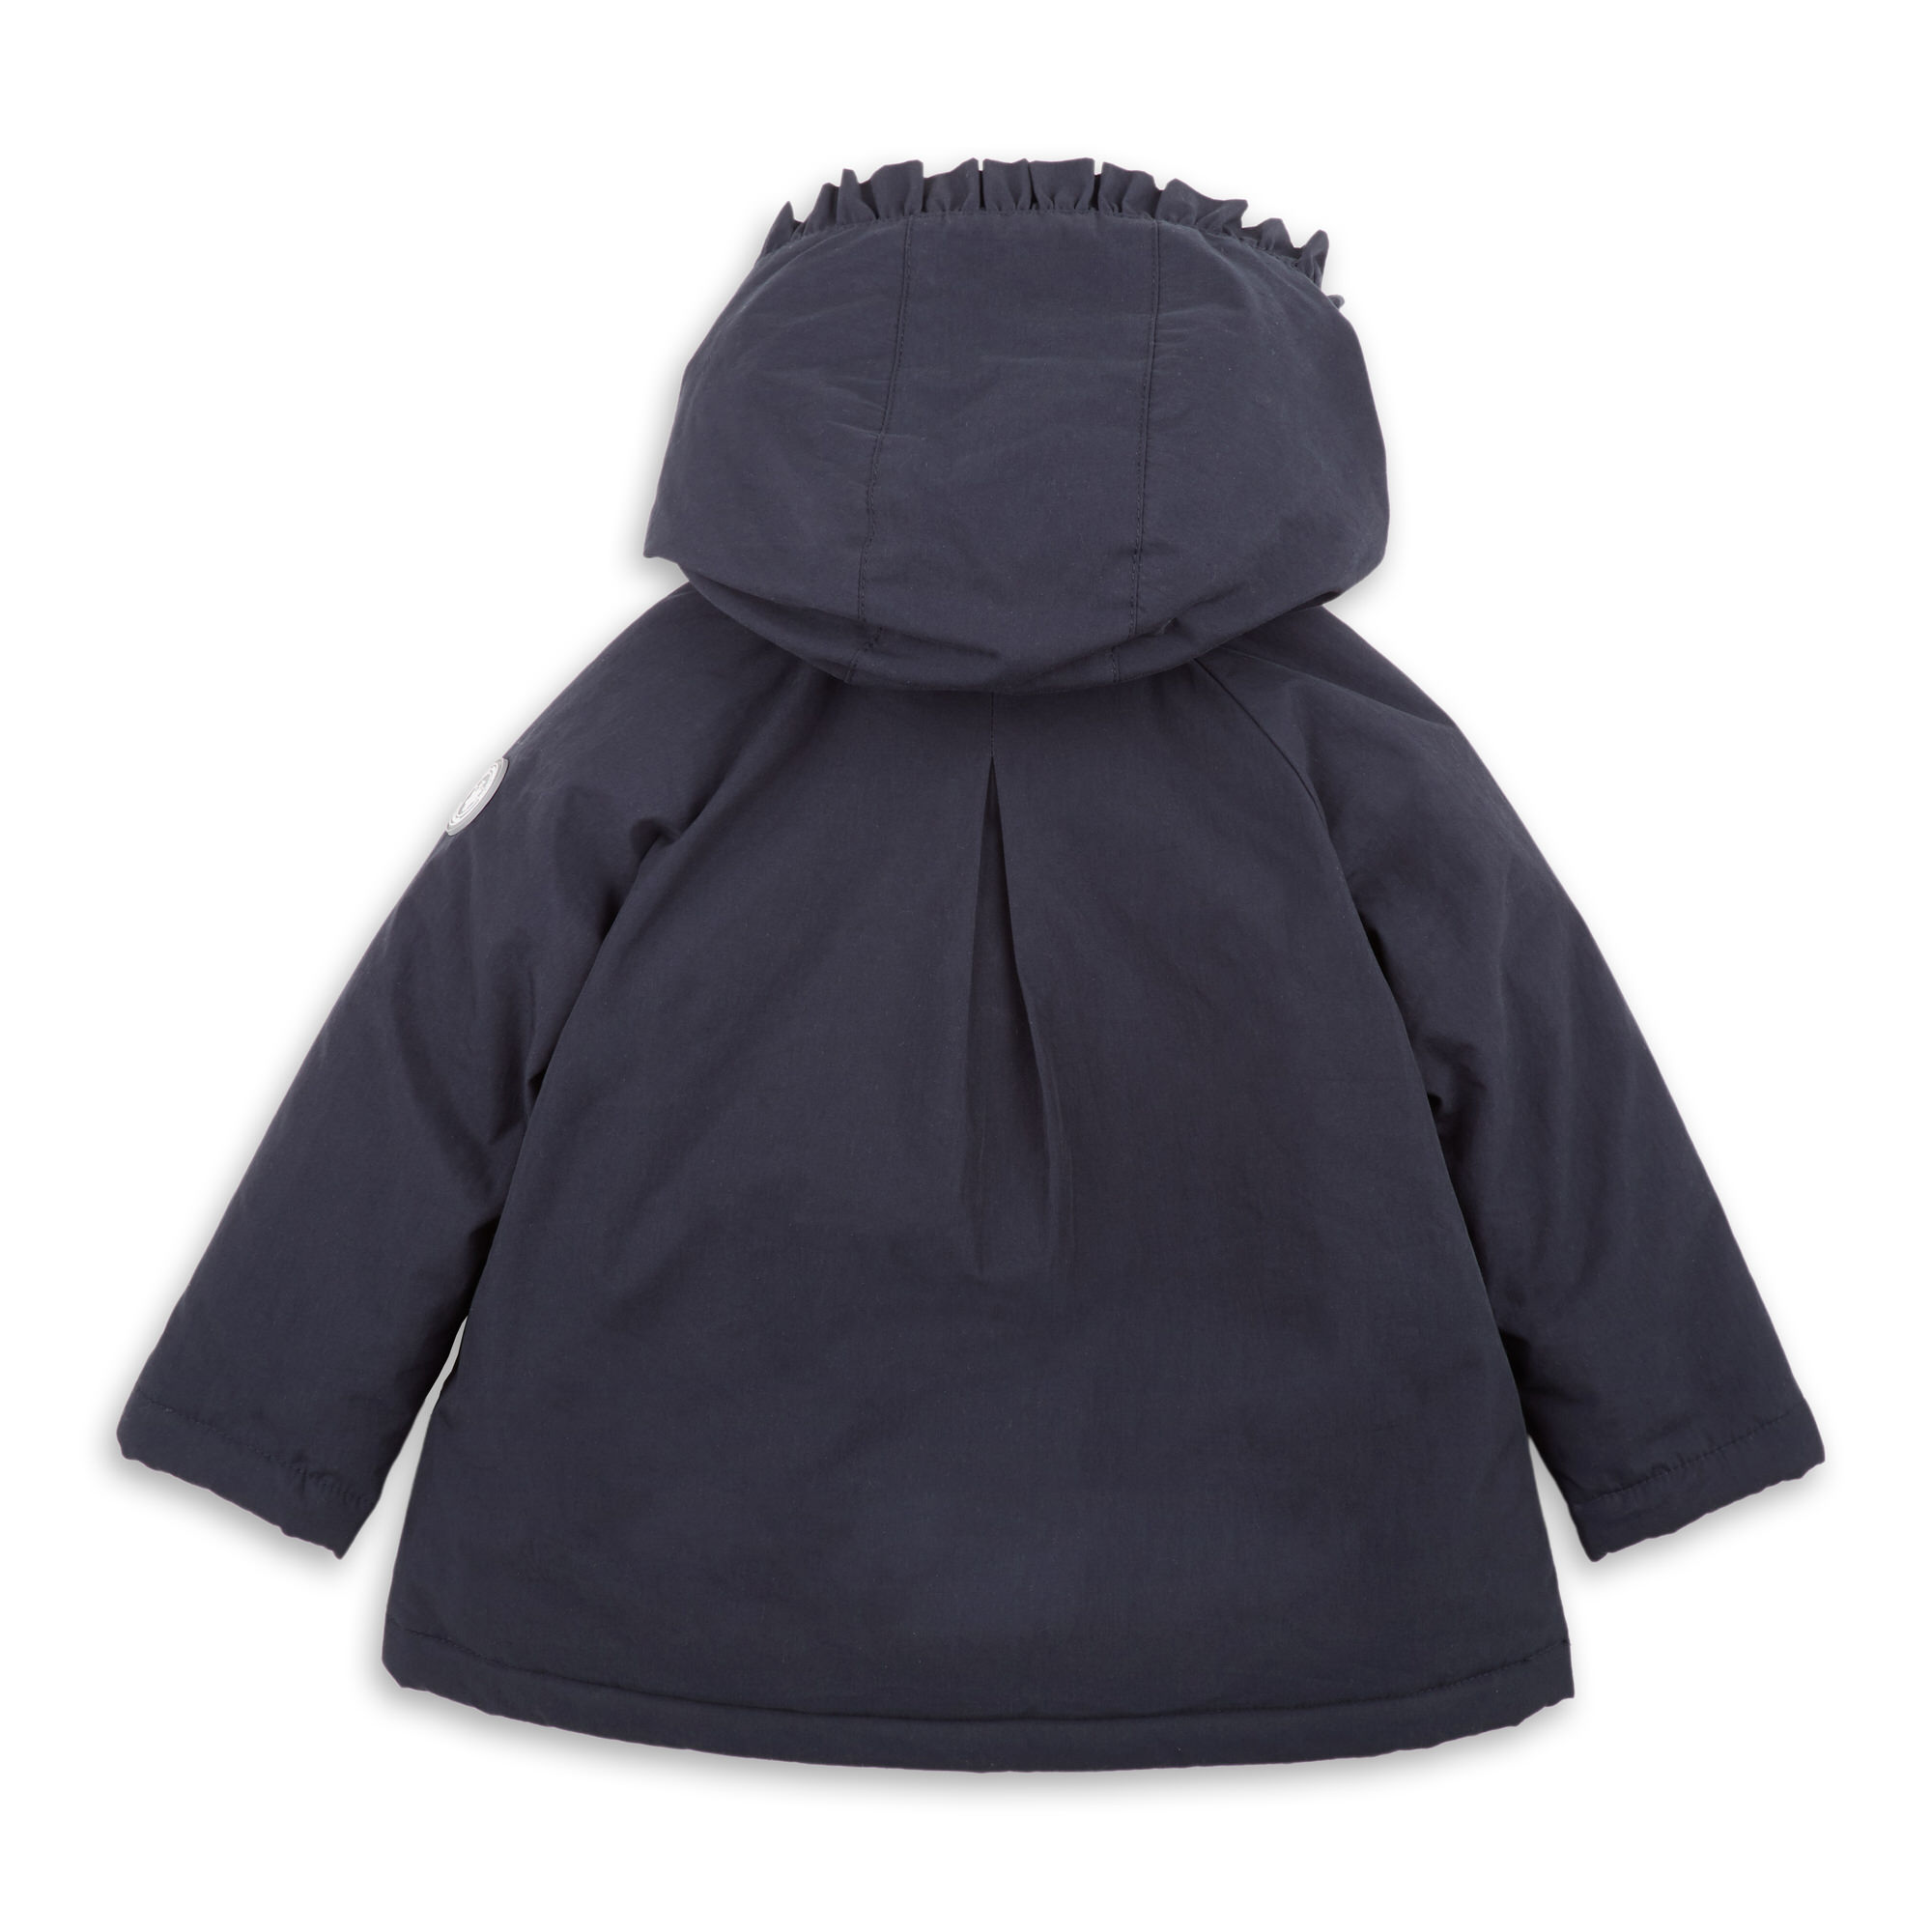 Baby girl ruche trimming hooded jacket, wadded